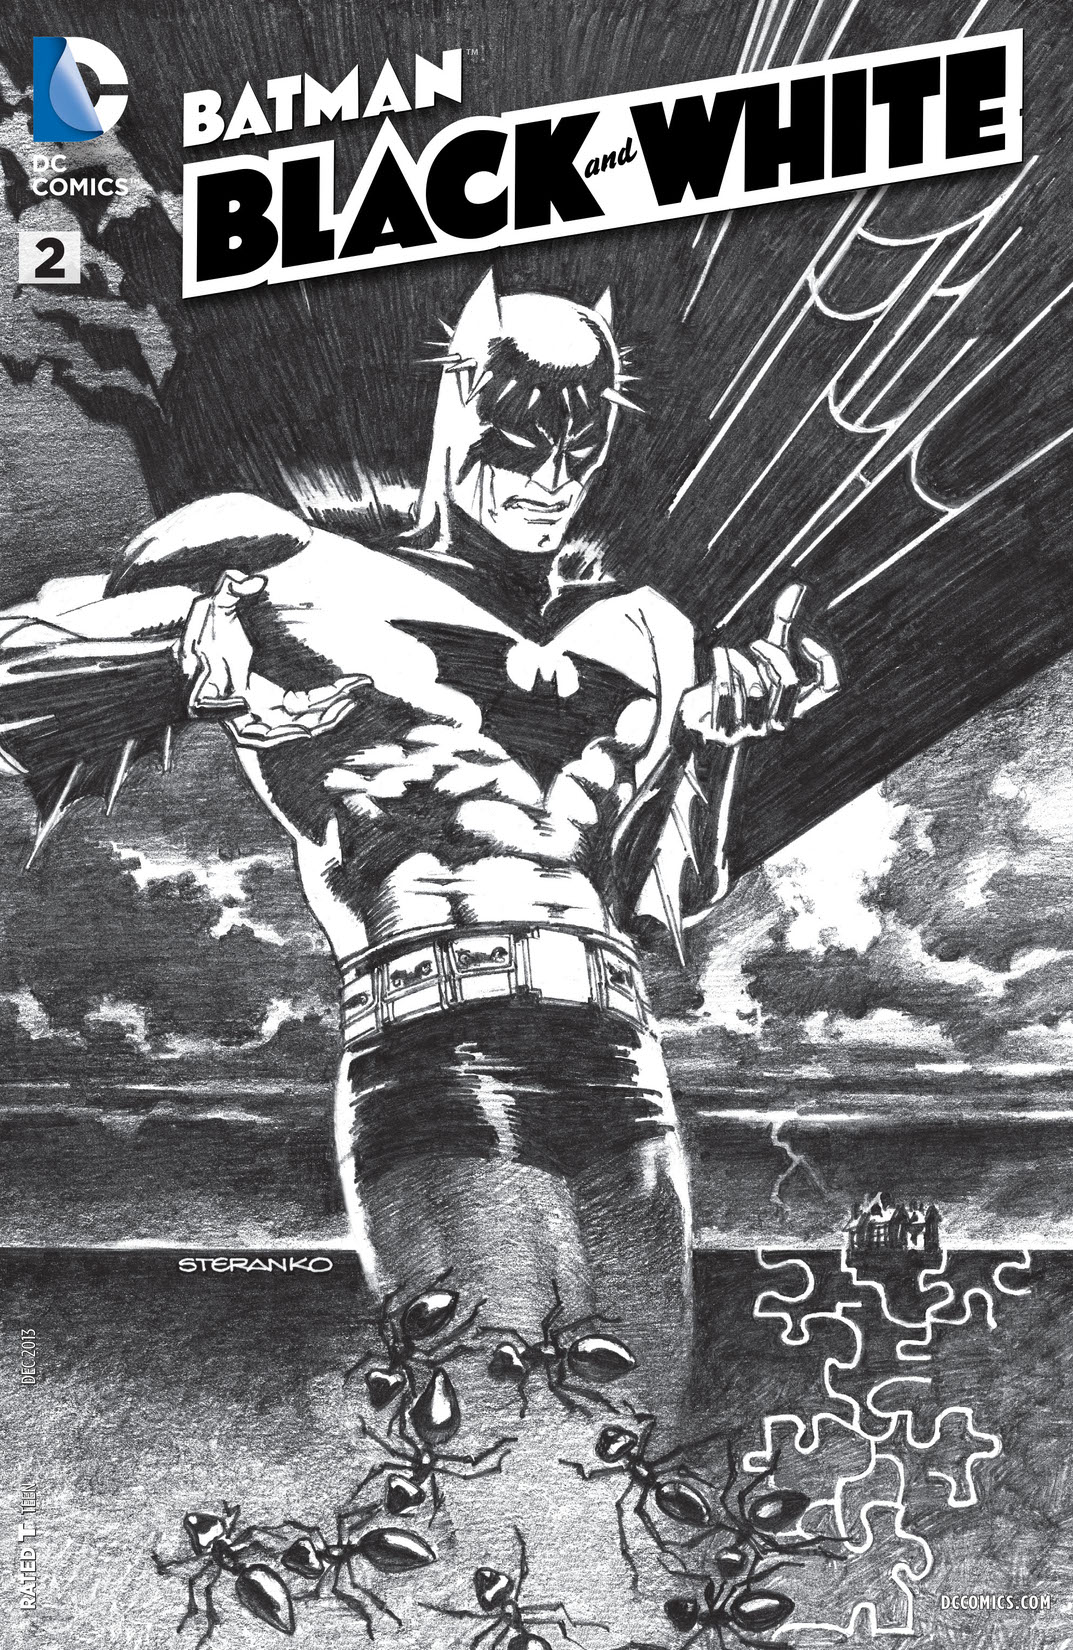 Batman Black and White (2013-) #2 preview images